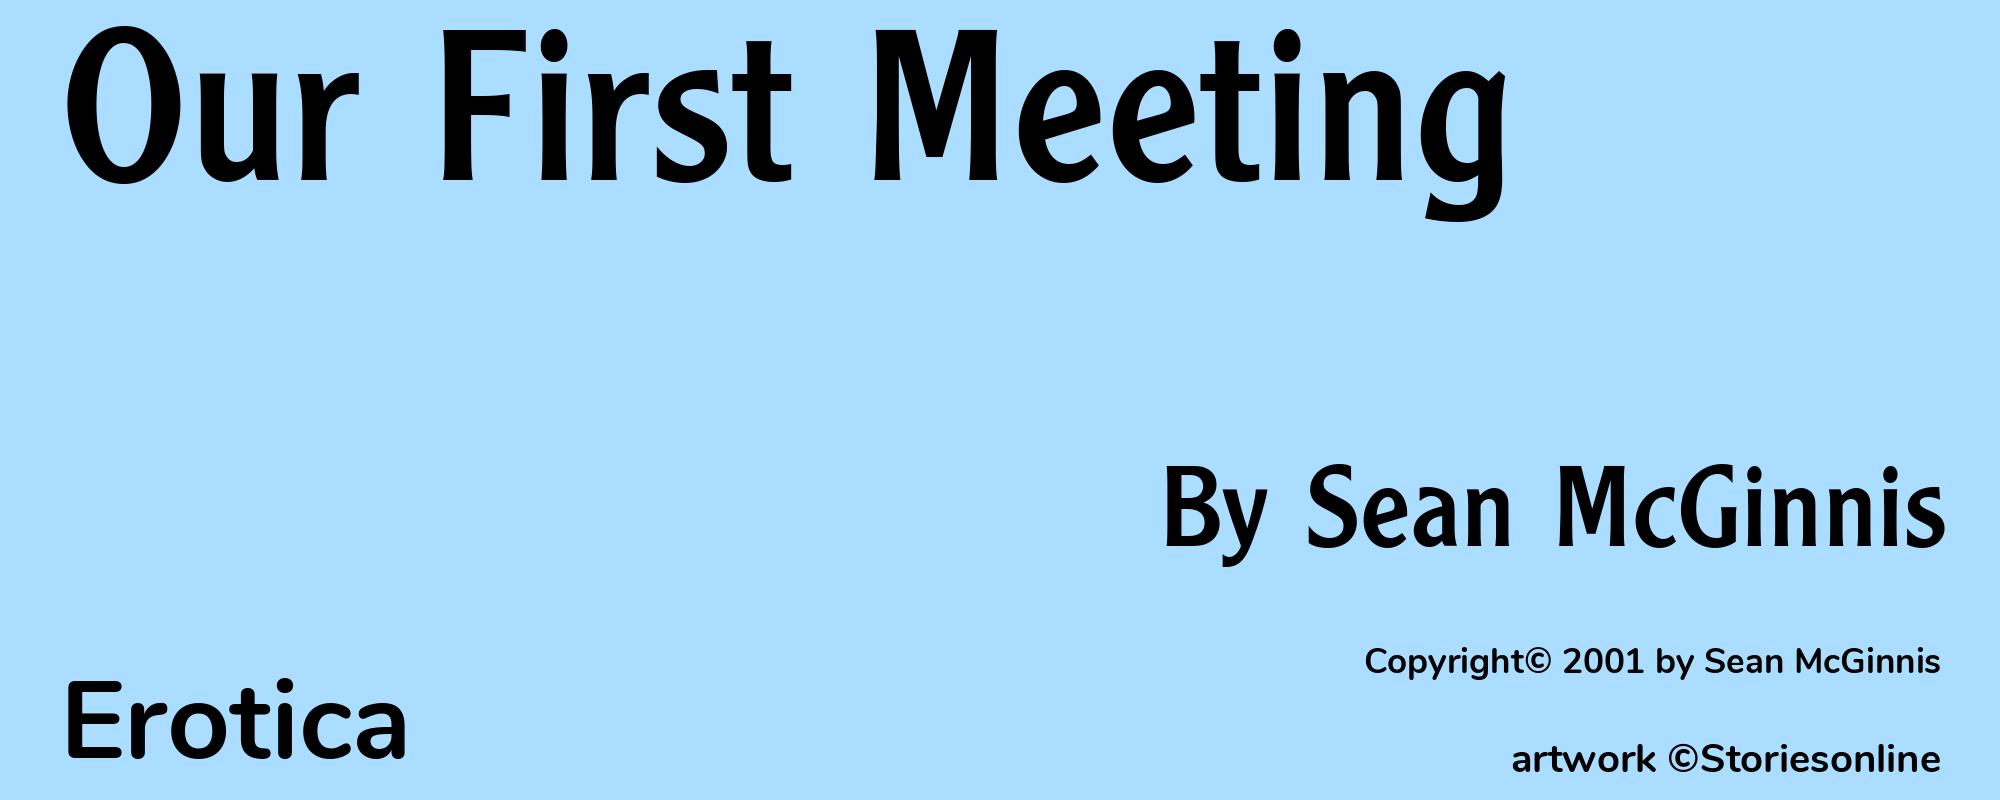 Our First Meeting - Cover